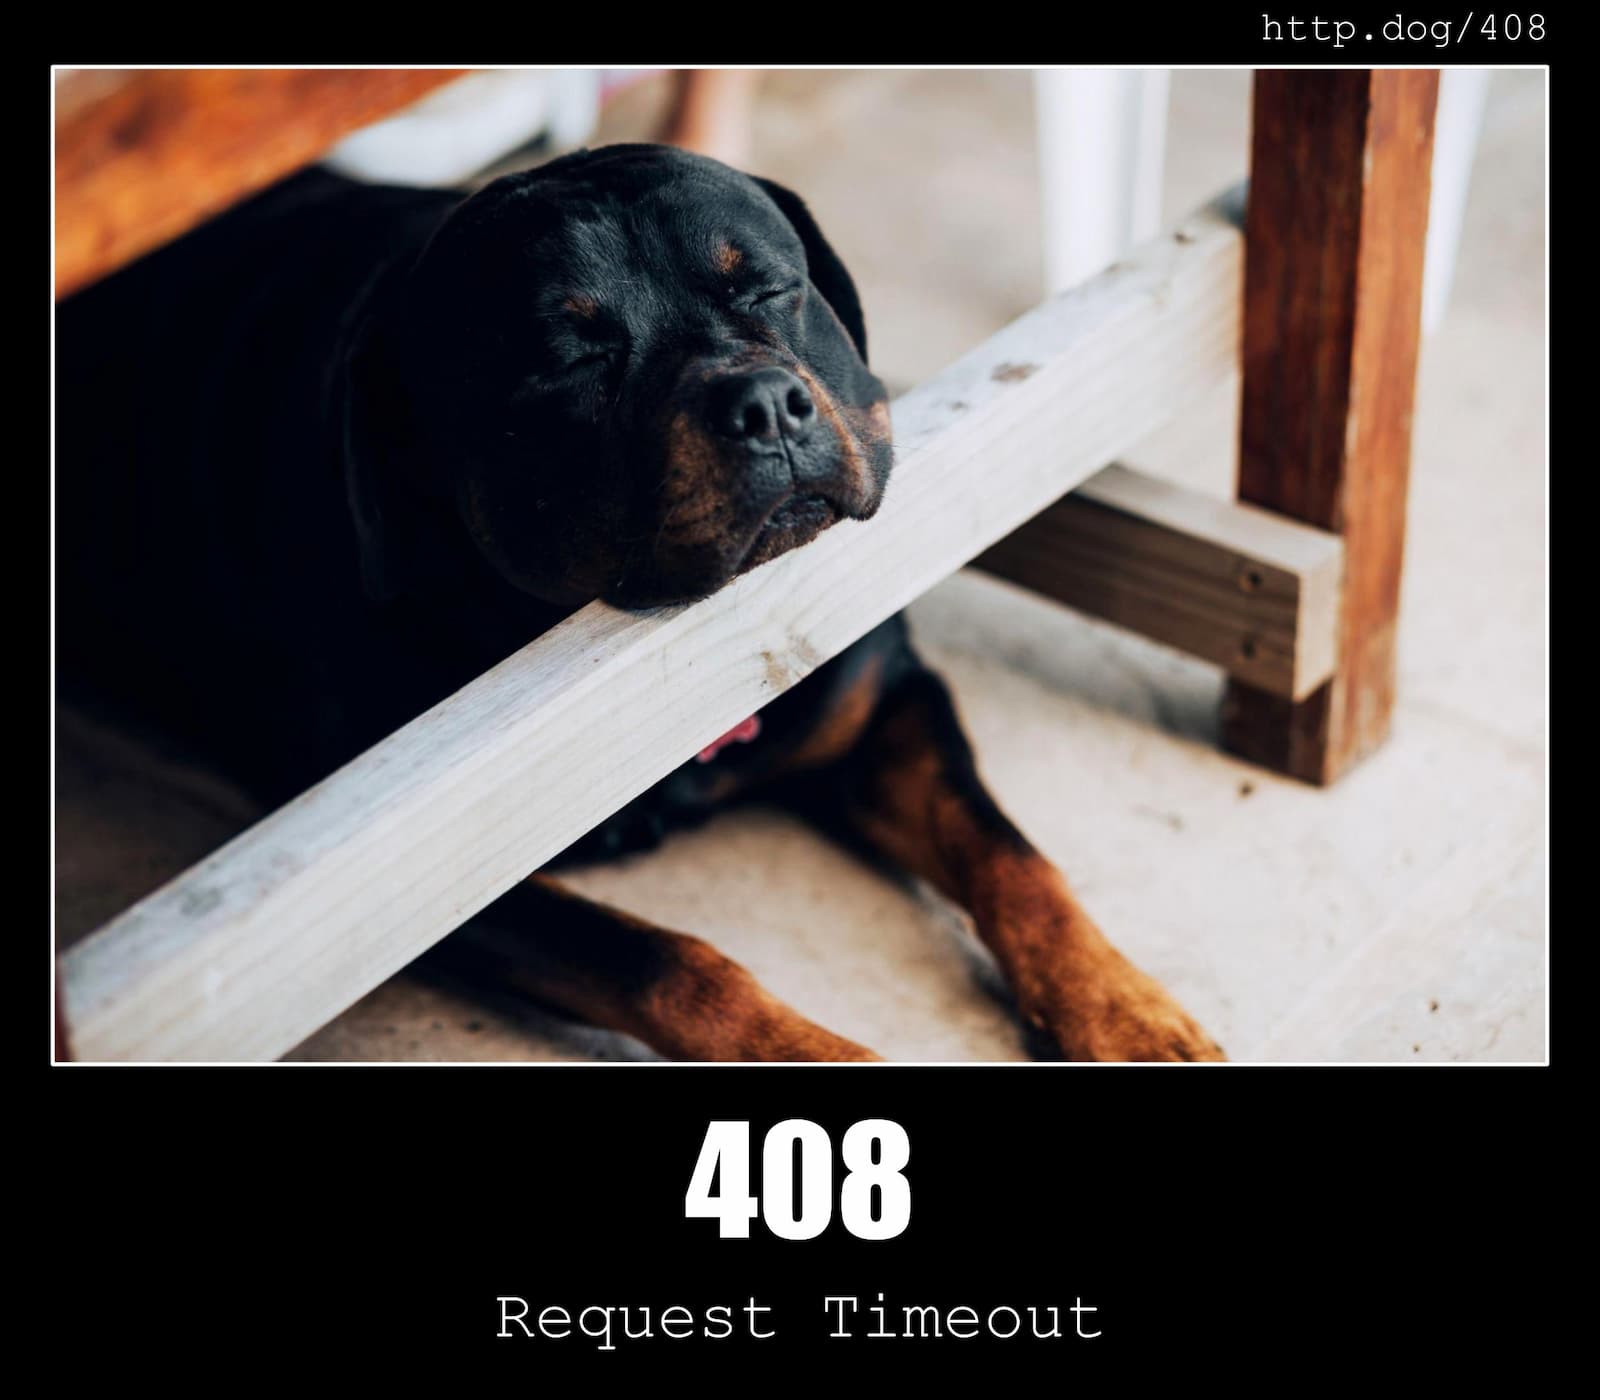 HTTP Status Code 408 Request Timeout & Dogs